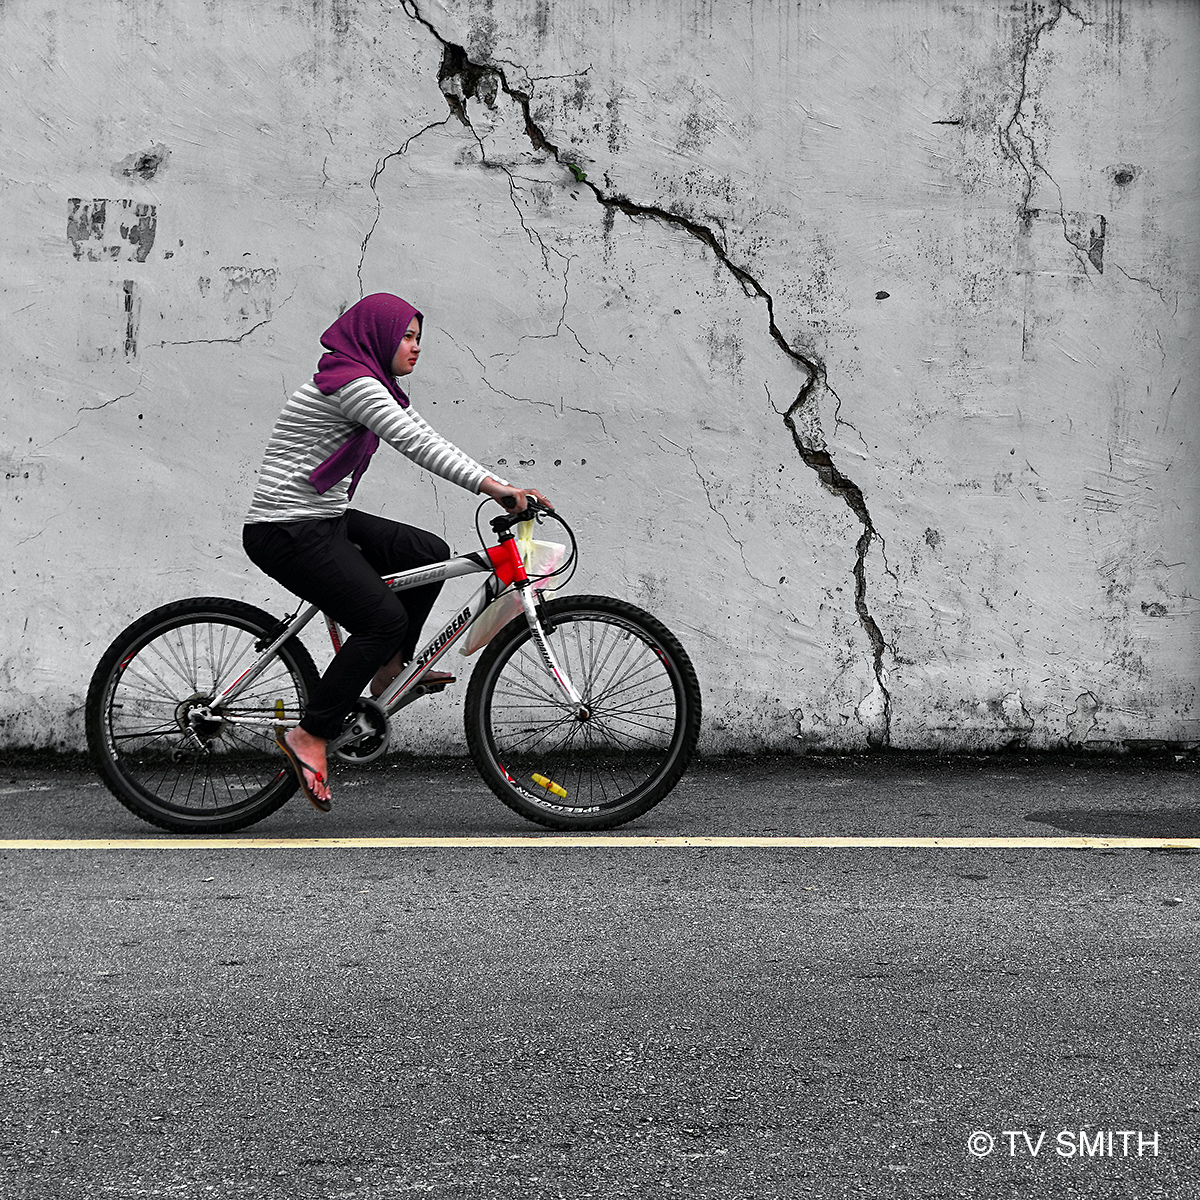 Cyclist and the crack on the wall, Tanjung Malim